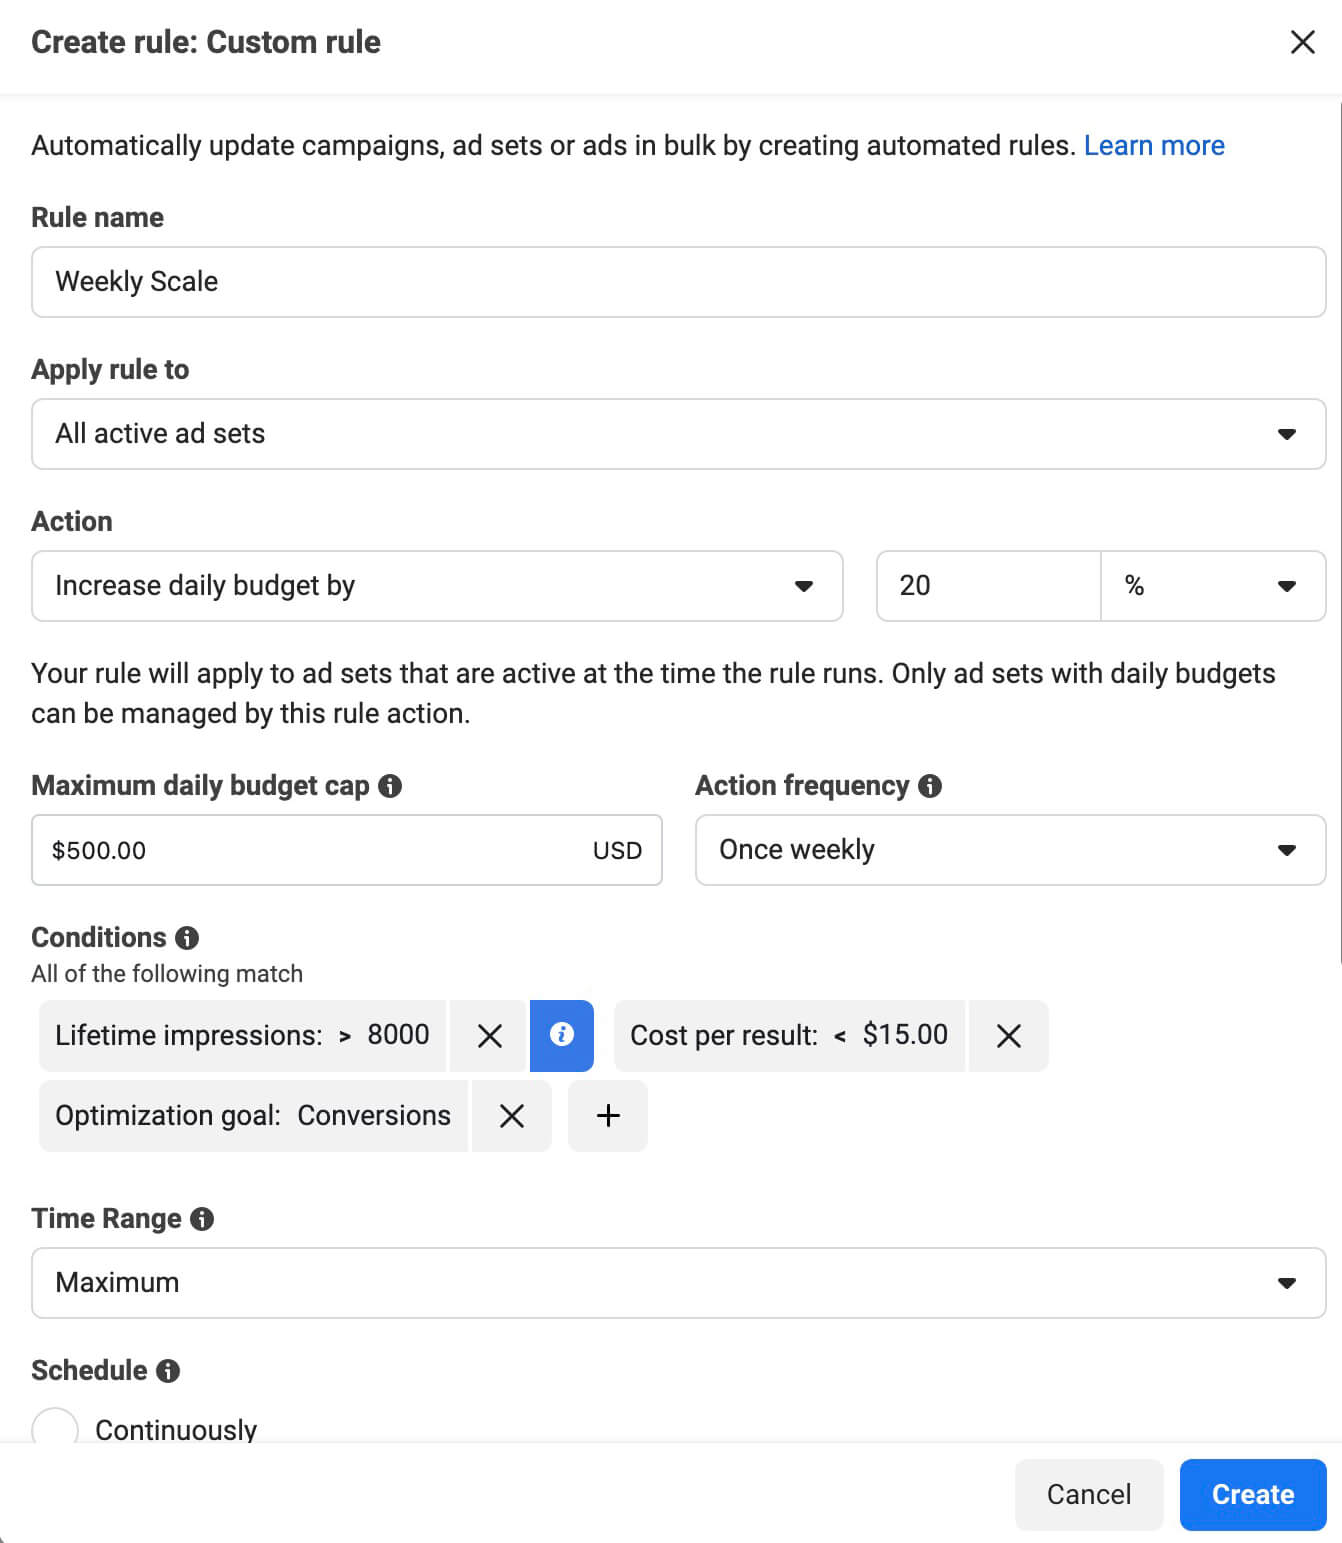 how-to-scale-automatically-with-preset-rules-for-facebook-ads-create-rule-custom-rule-conditions-for-scaling-based-on-kpi-campaigns-example-20